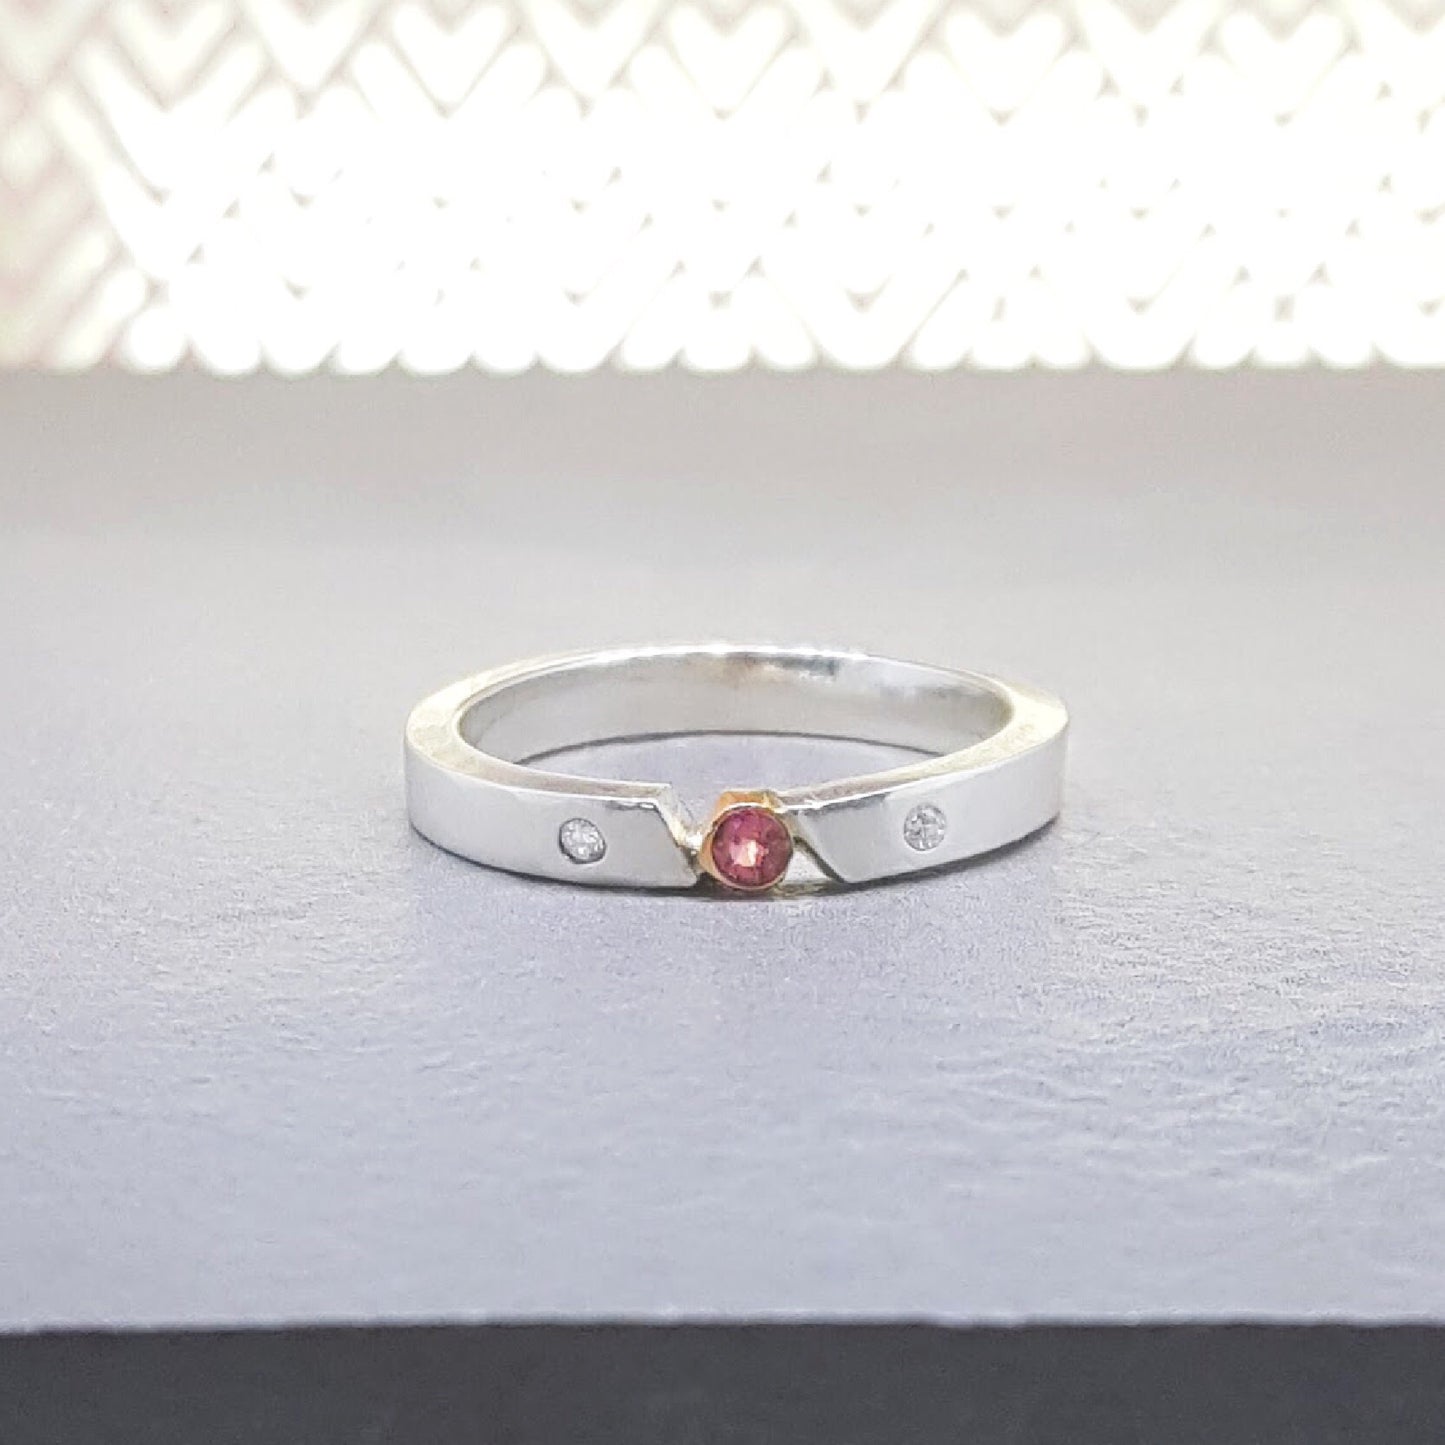 A place in the sun - pink sapphire ring with bezel setting